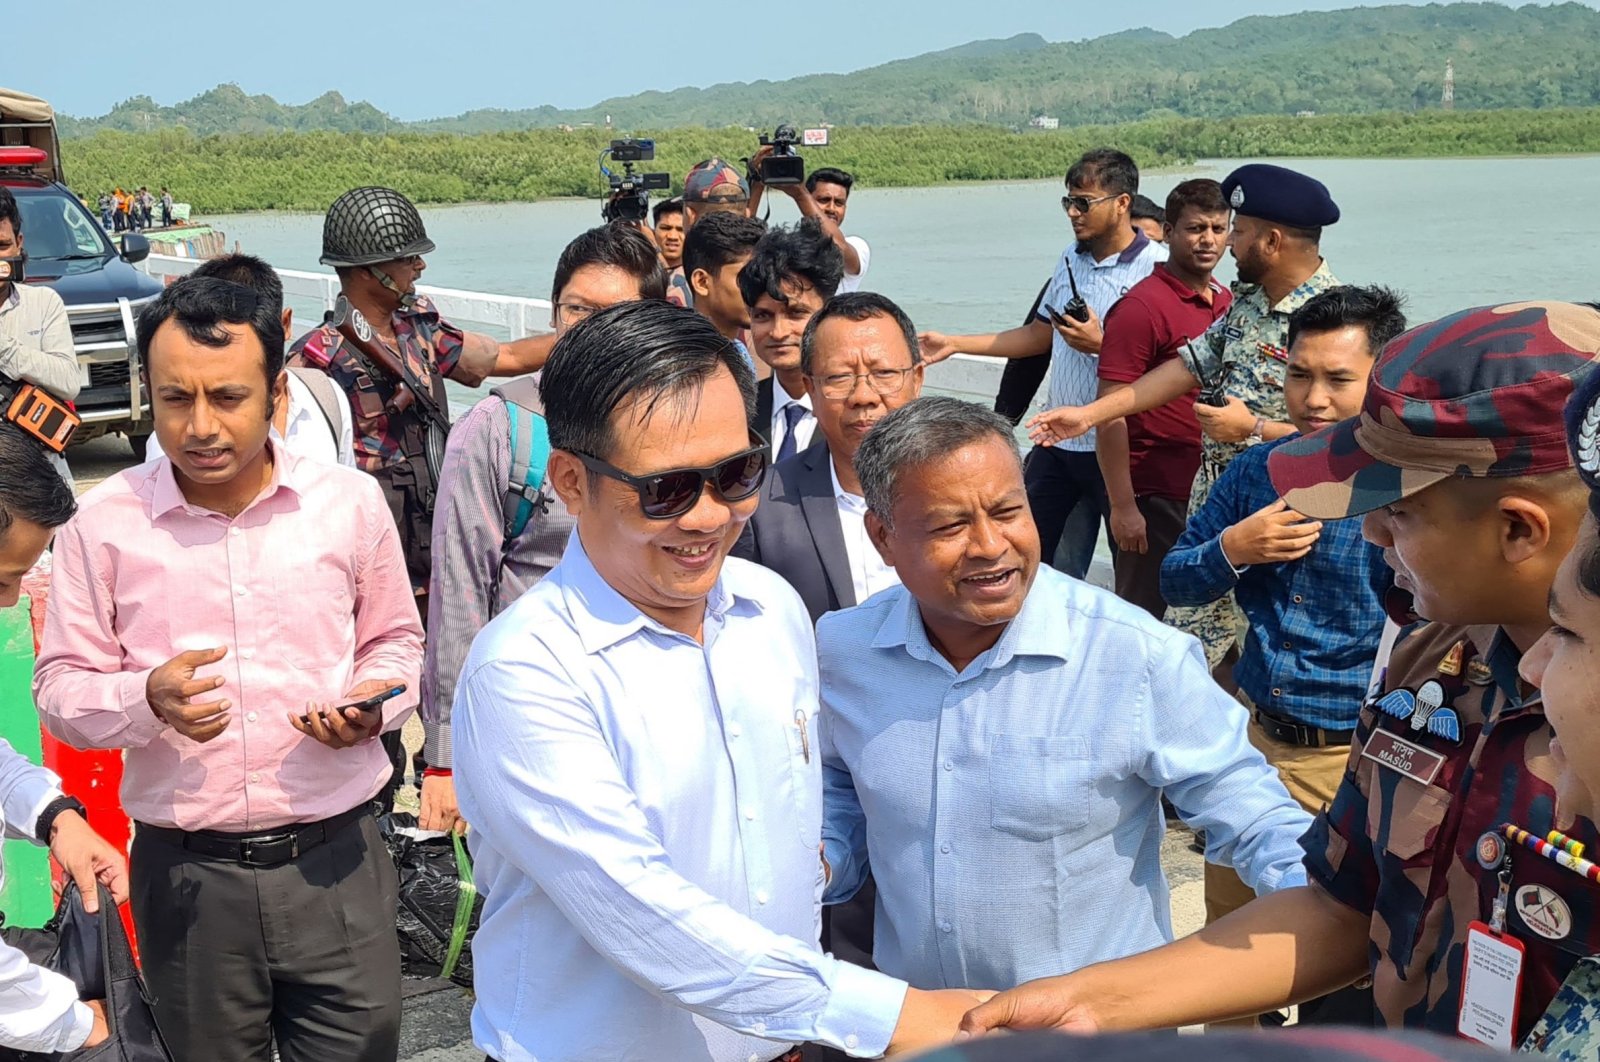 A Myanmar delegation arrives to meet Bangladeshi officials as part of efforts to revive a long-stalled plan to return the stateless Rohingya minority to their homeland in Myanmar, Teknaf, Bangladesh, May 25, 2023. (AFP Photo)